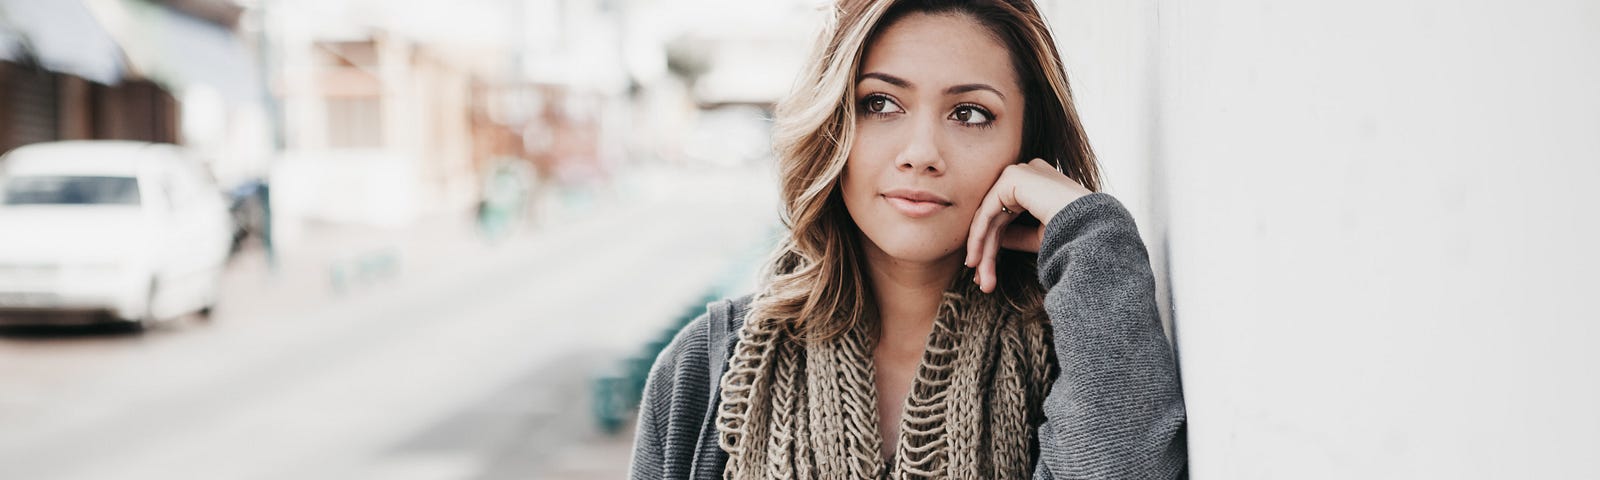 A woman wearing a scarf pauses on a street to think.